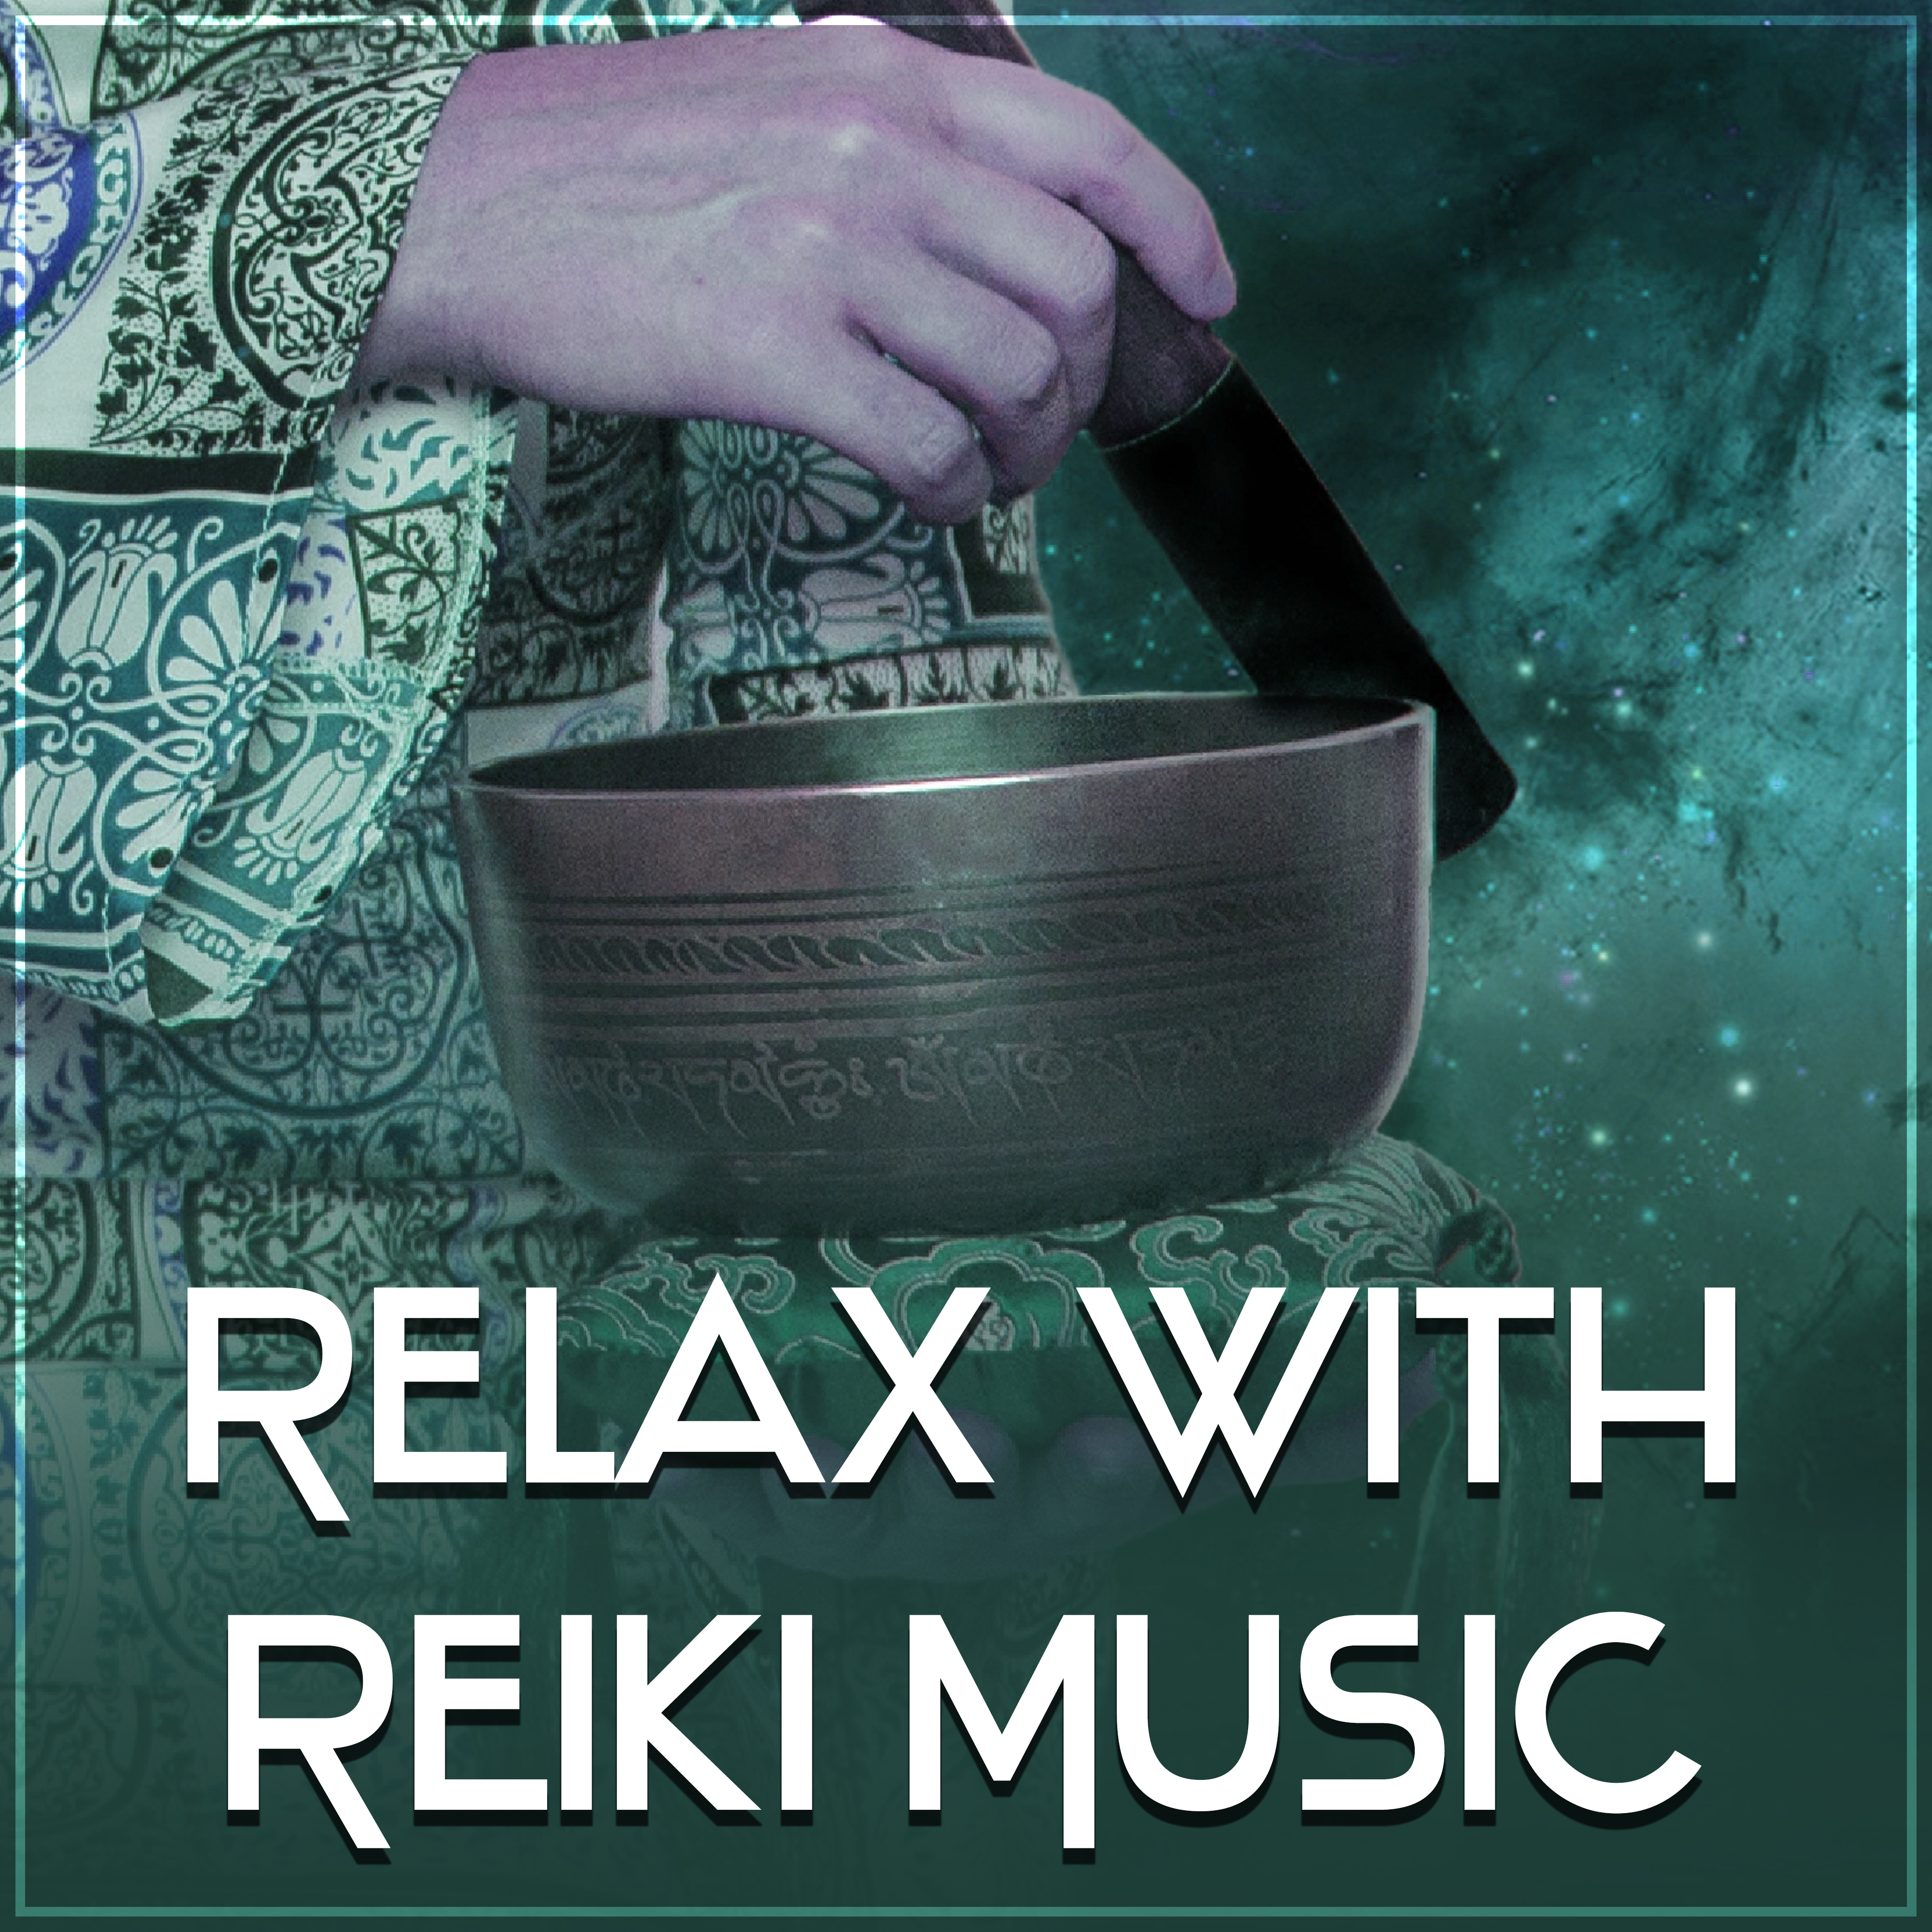 Relax with Reiki Music  Peaceful Music, Healing Sounds, Deep Sleep, Relaxing Therapy, Zen, Pure Waves, Nature Sounds